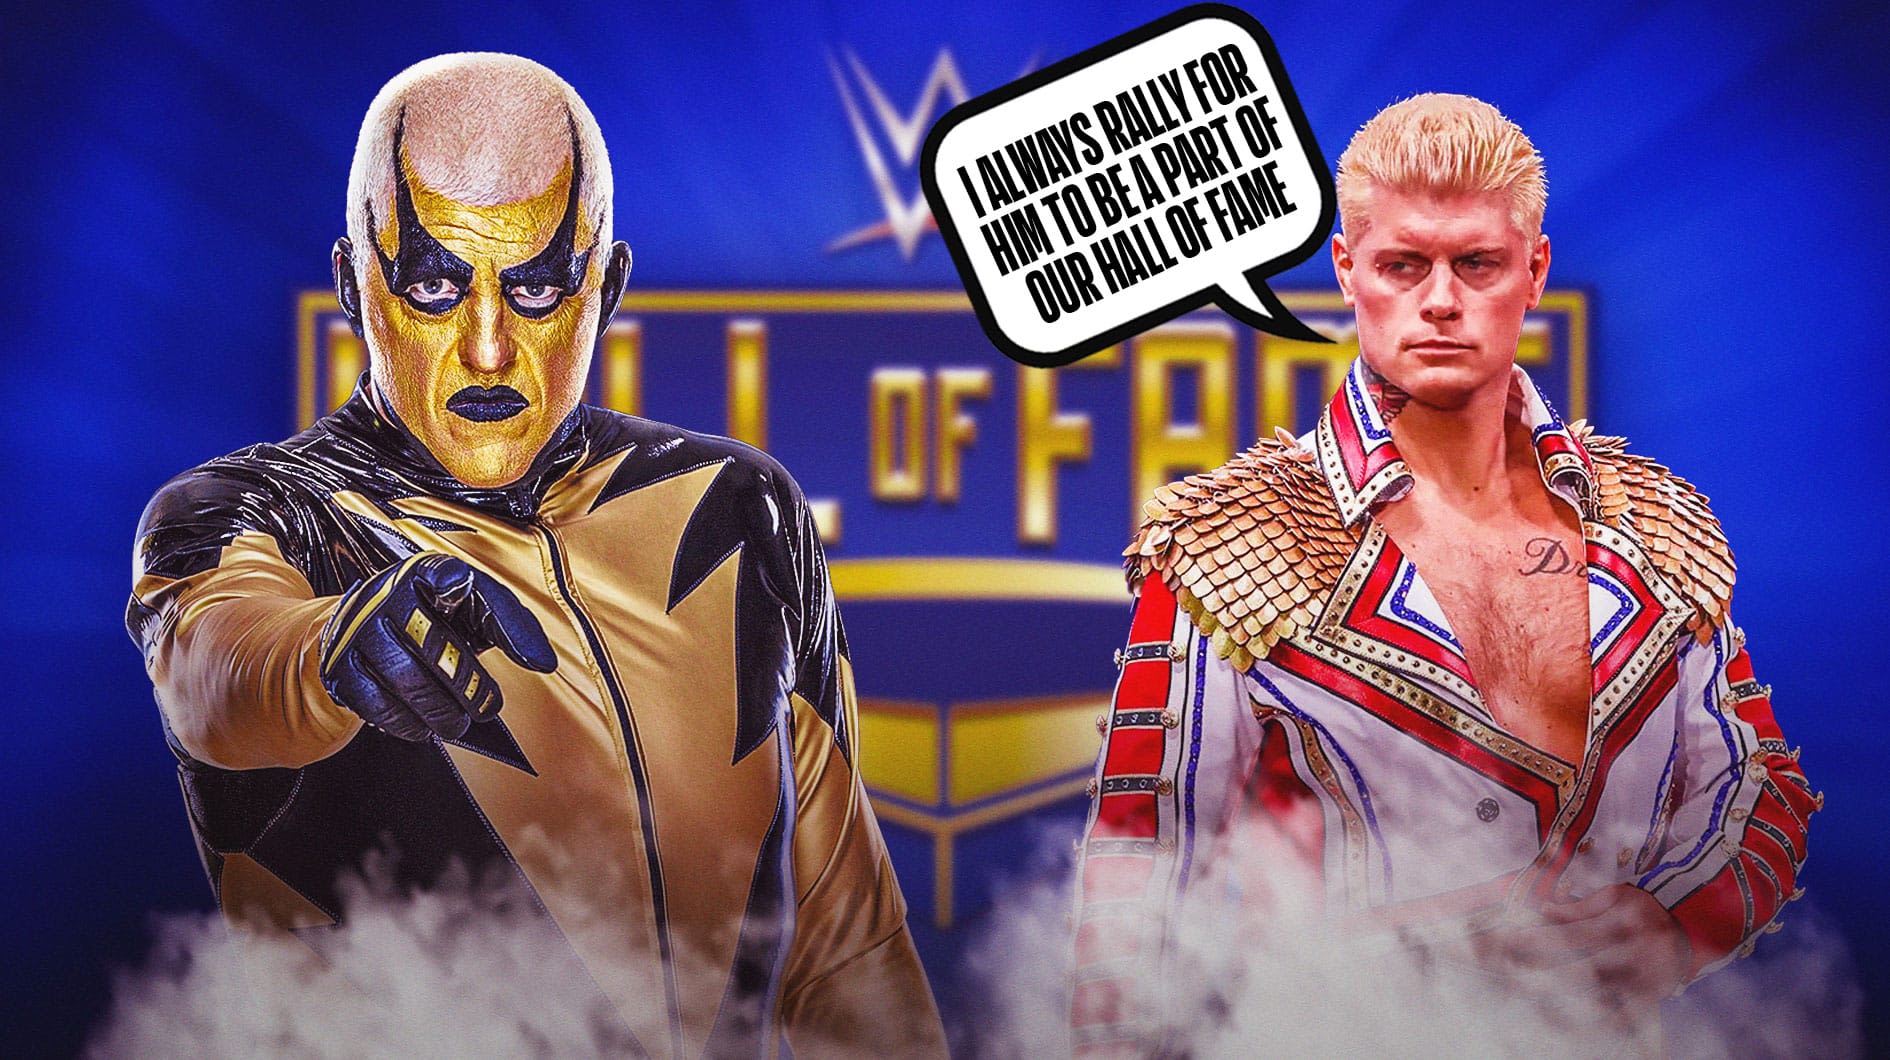 Cody Rhodes wants to see Dustin Rhodes land in the WWE Hall of Fame